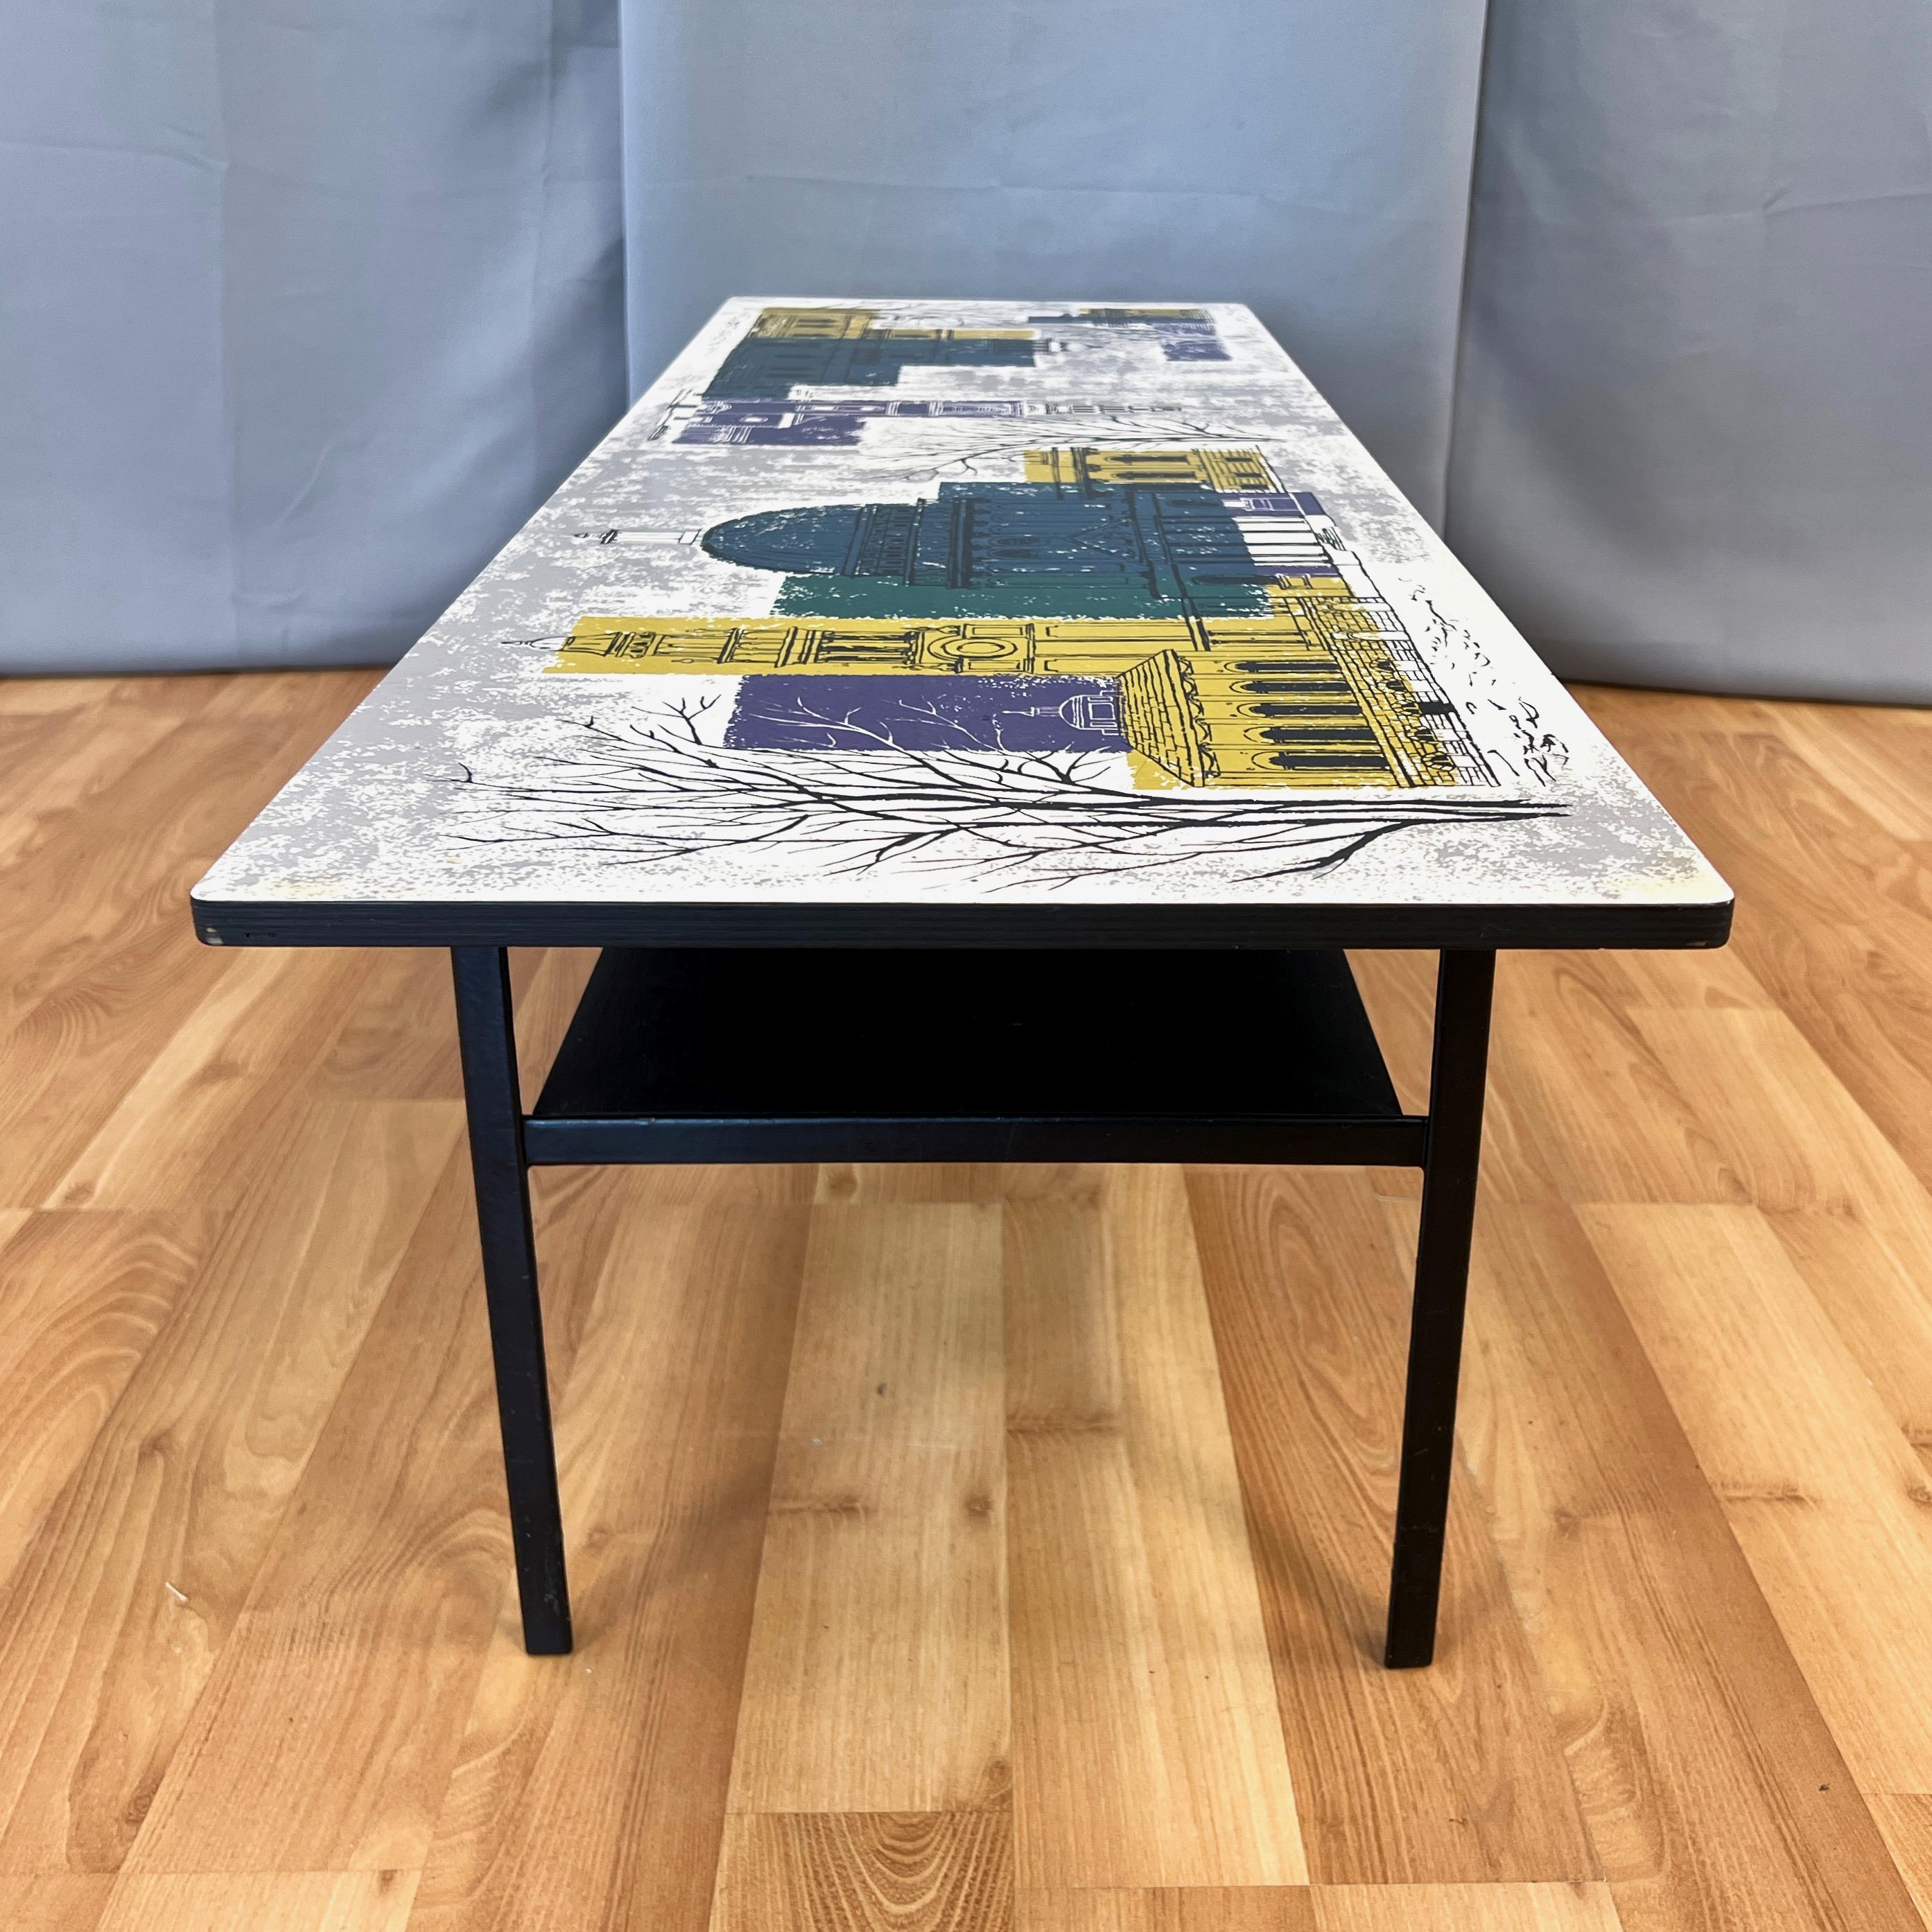 John Piper London Skyline Coffee Table by Myer for Conran and Heal’s, c. 1960 For Sale 4